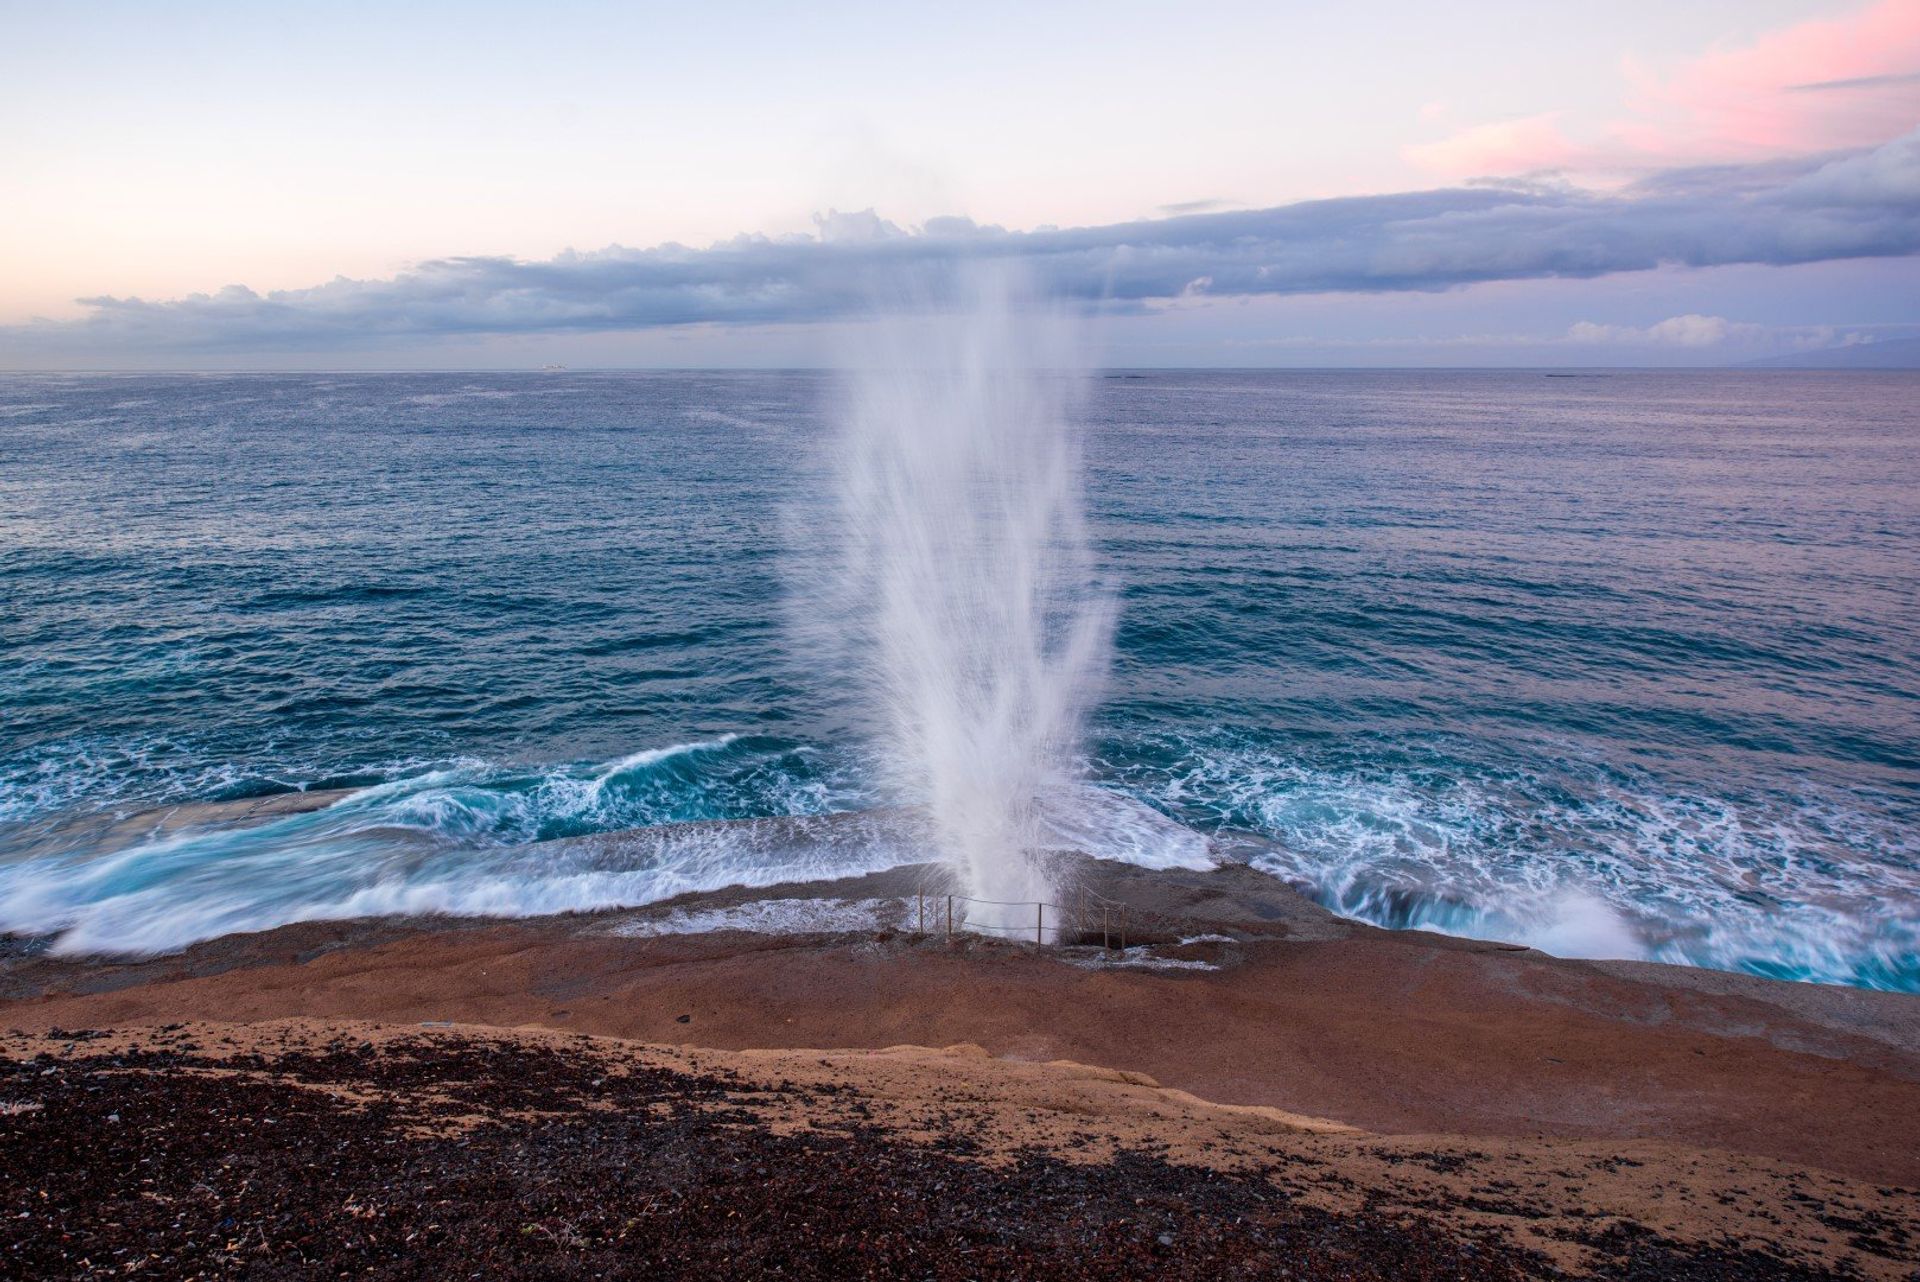 The natural geyser spouting water on the coast of Los Cristianos resort 